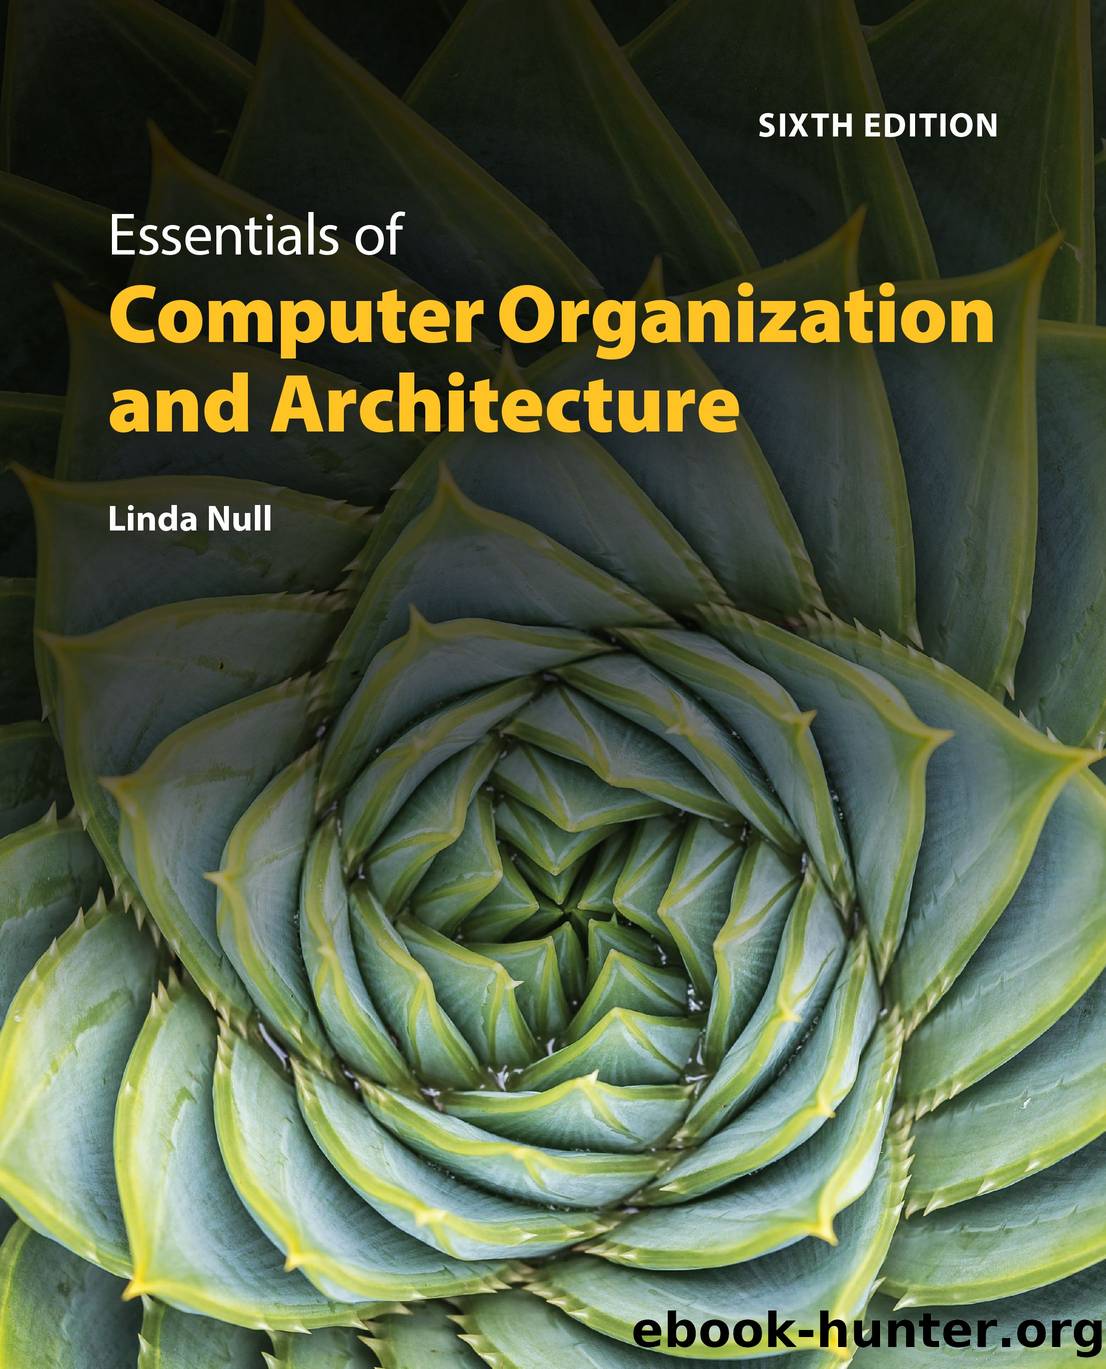 The Essentials of Computer Organization and Architecture, Sixth Edition by Linda Null